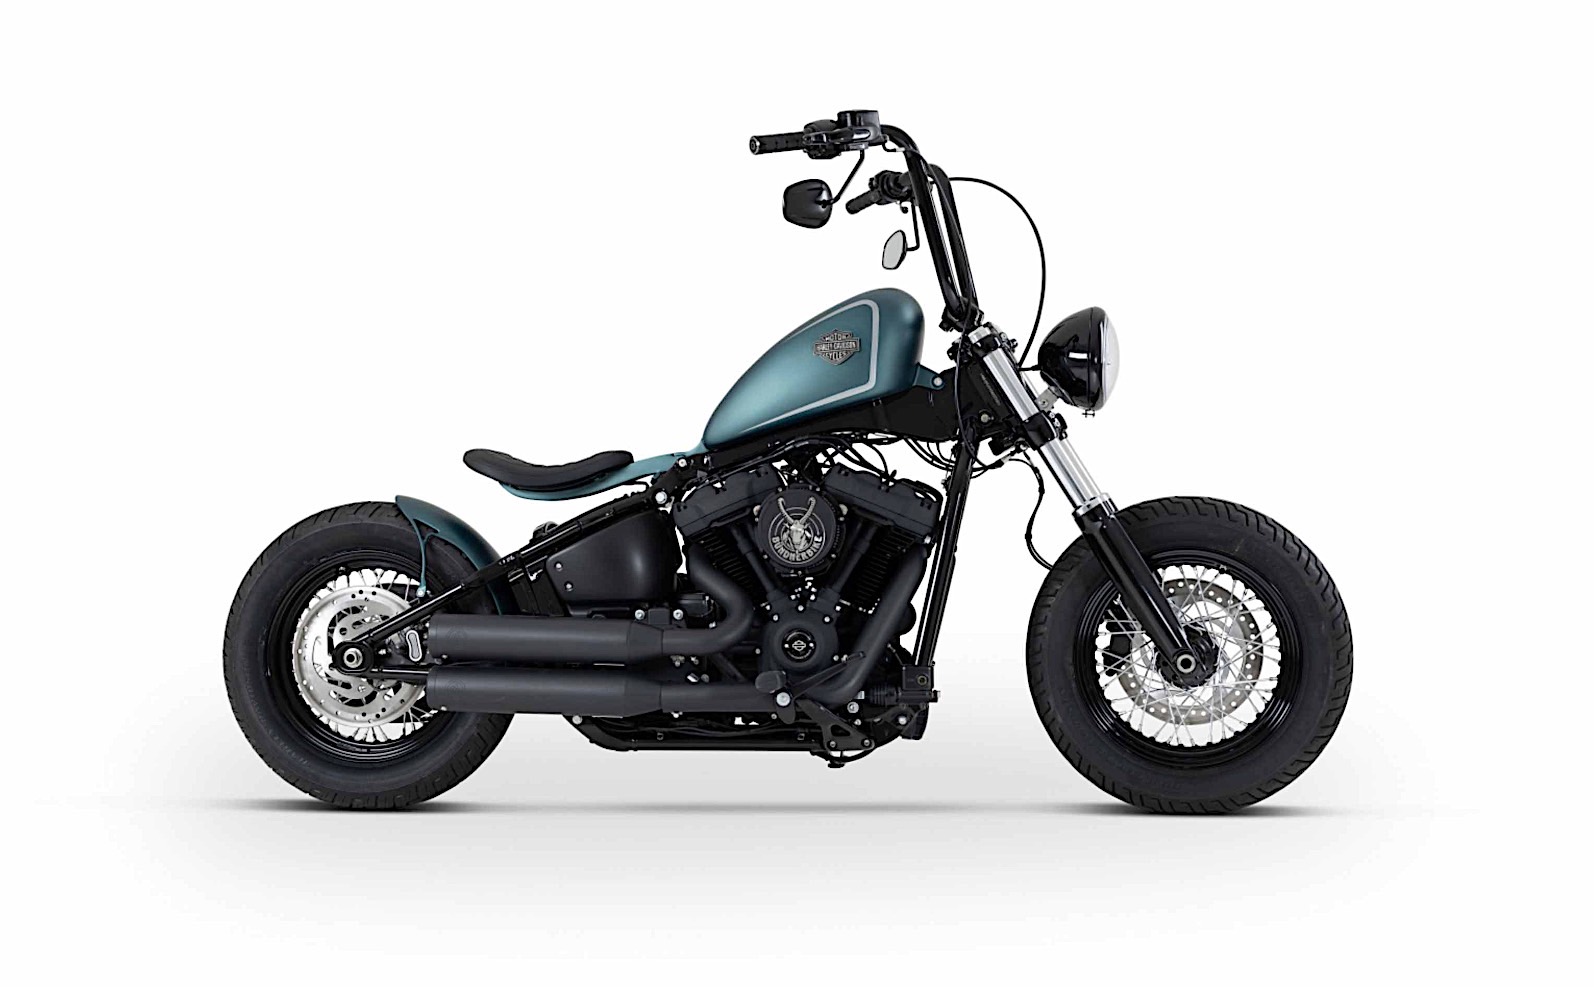 Harley-Davidson Street Bob Is All Sorts of Custom, That Floating Seat Is Out of This World